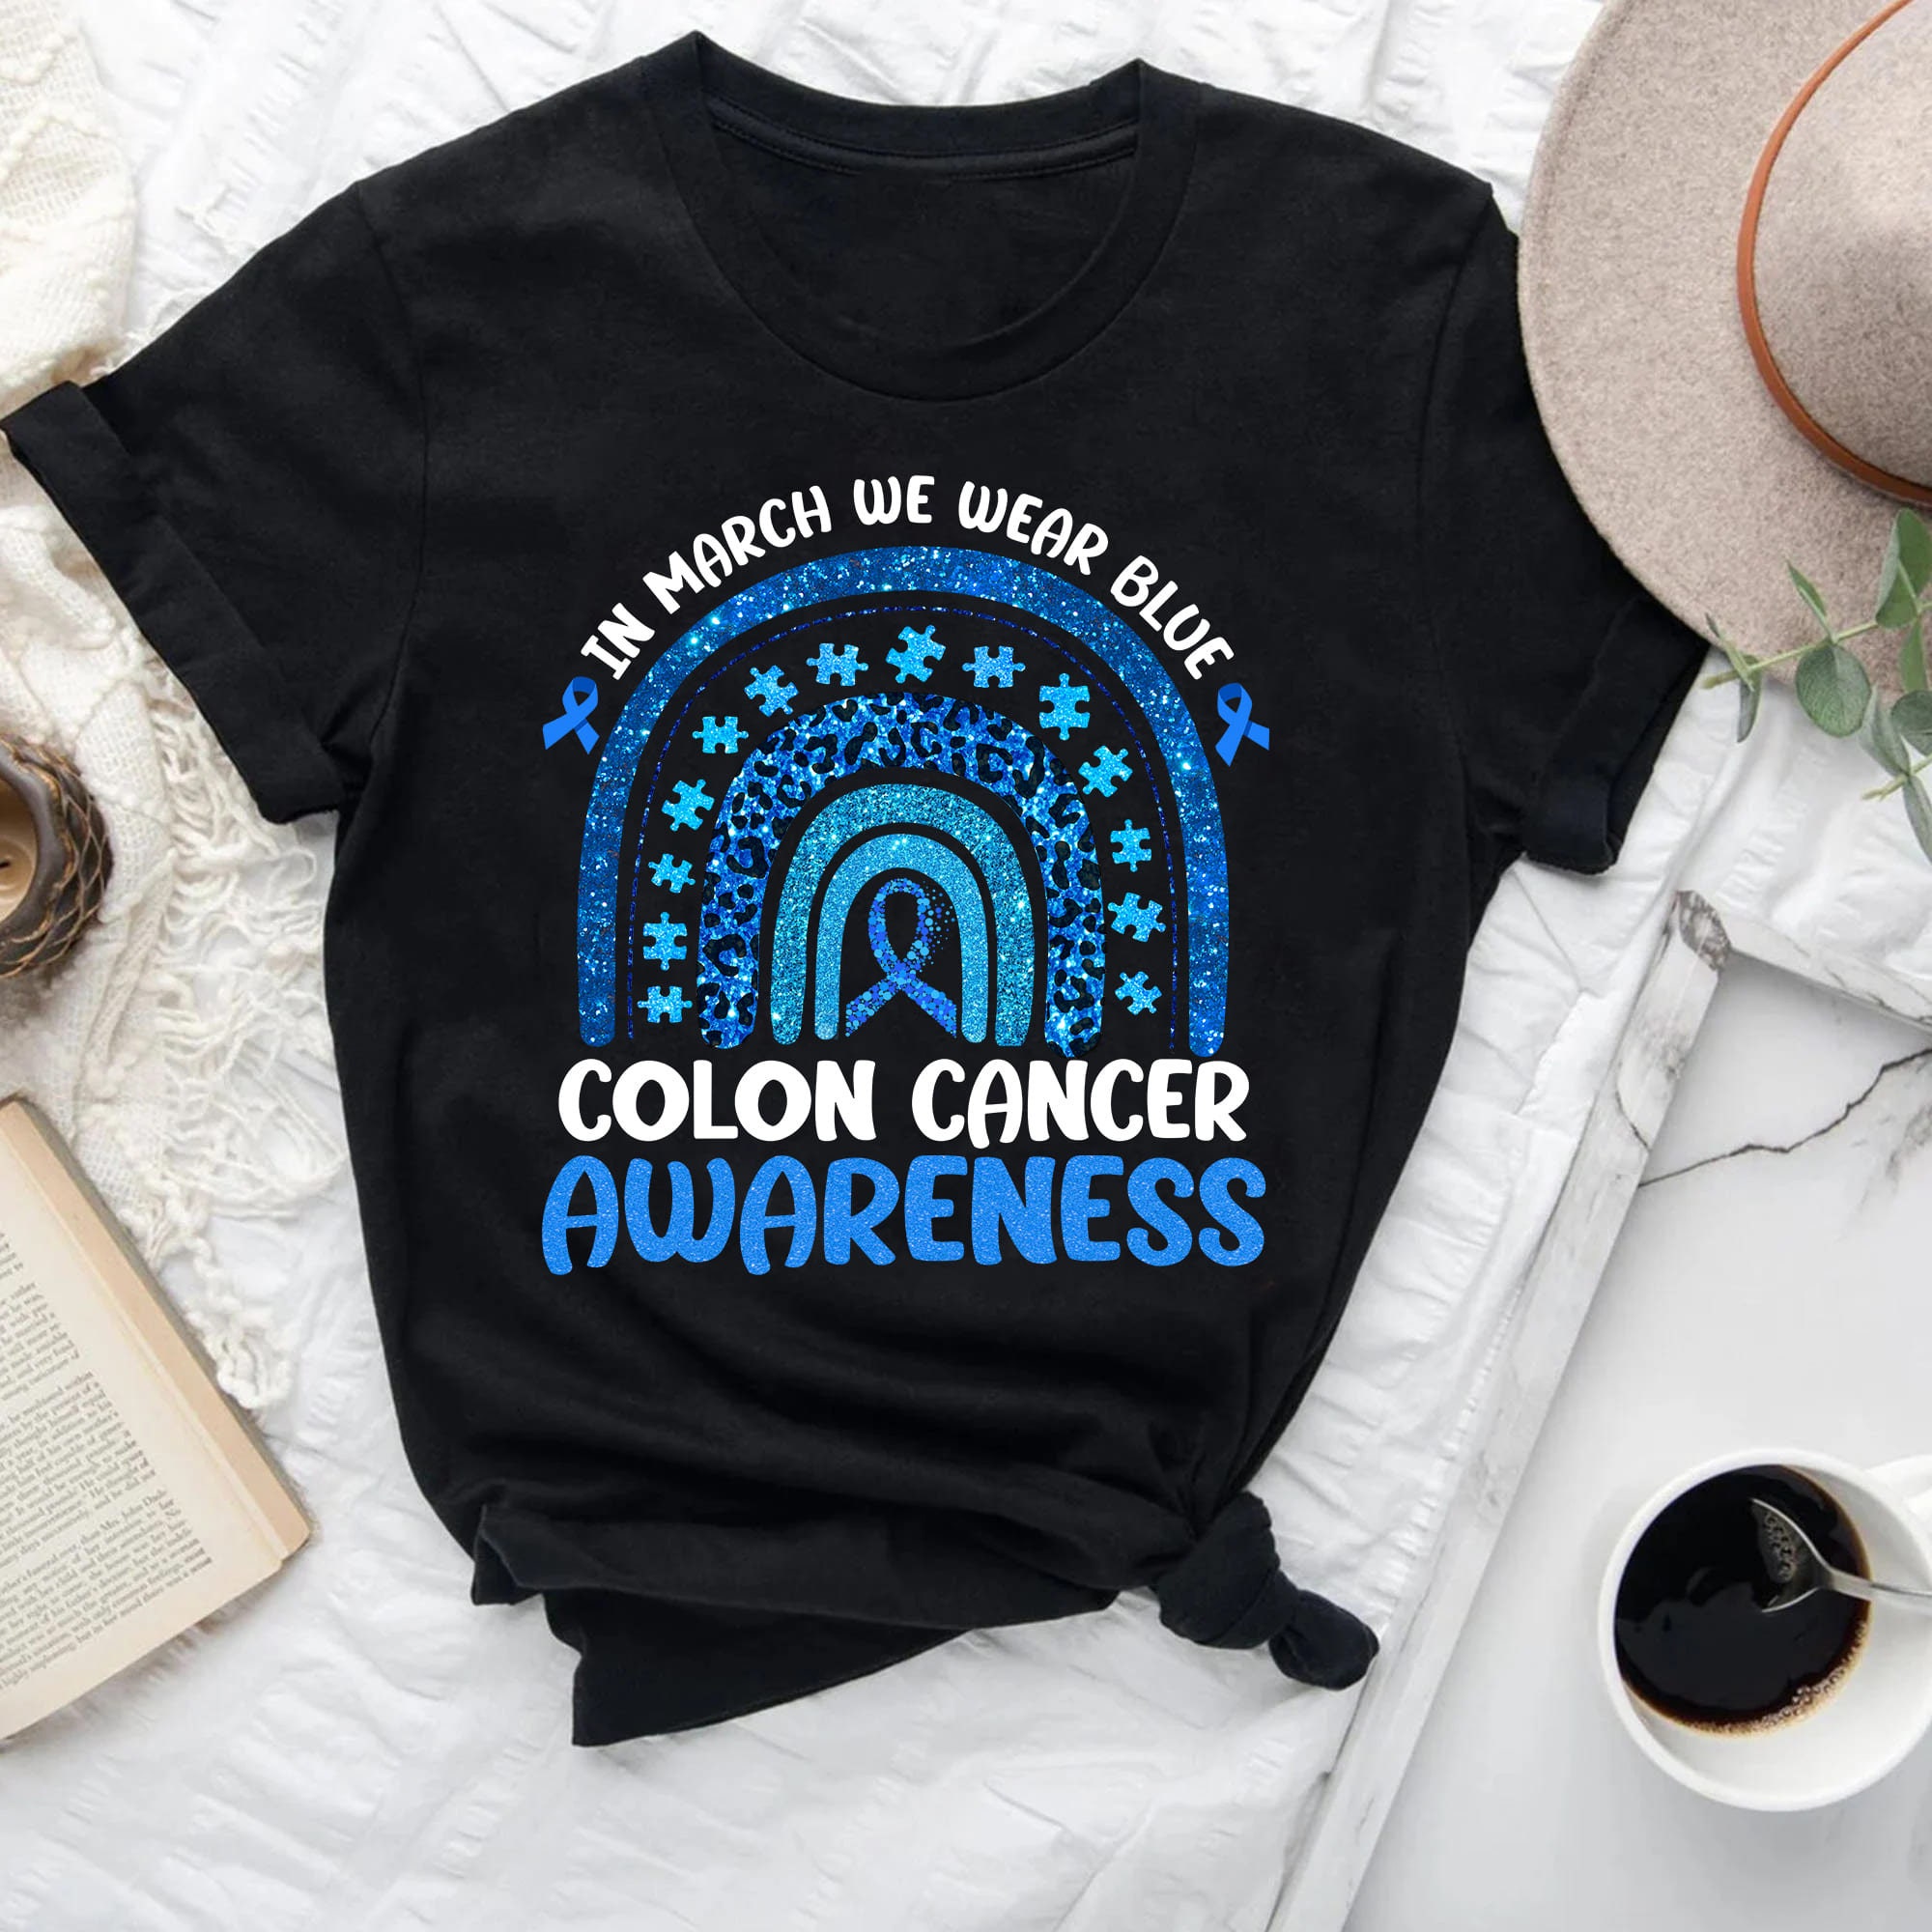 Colon Cancer Awareness Ribbon Colon Cancer Awareness Month Gift Shirt Rainbow In March We Wear Blue